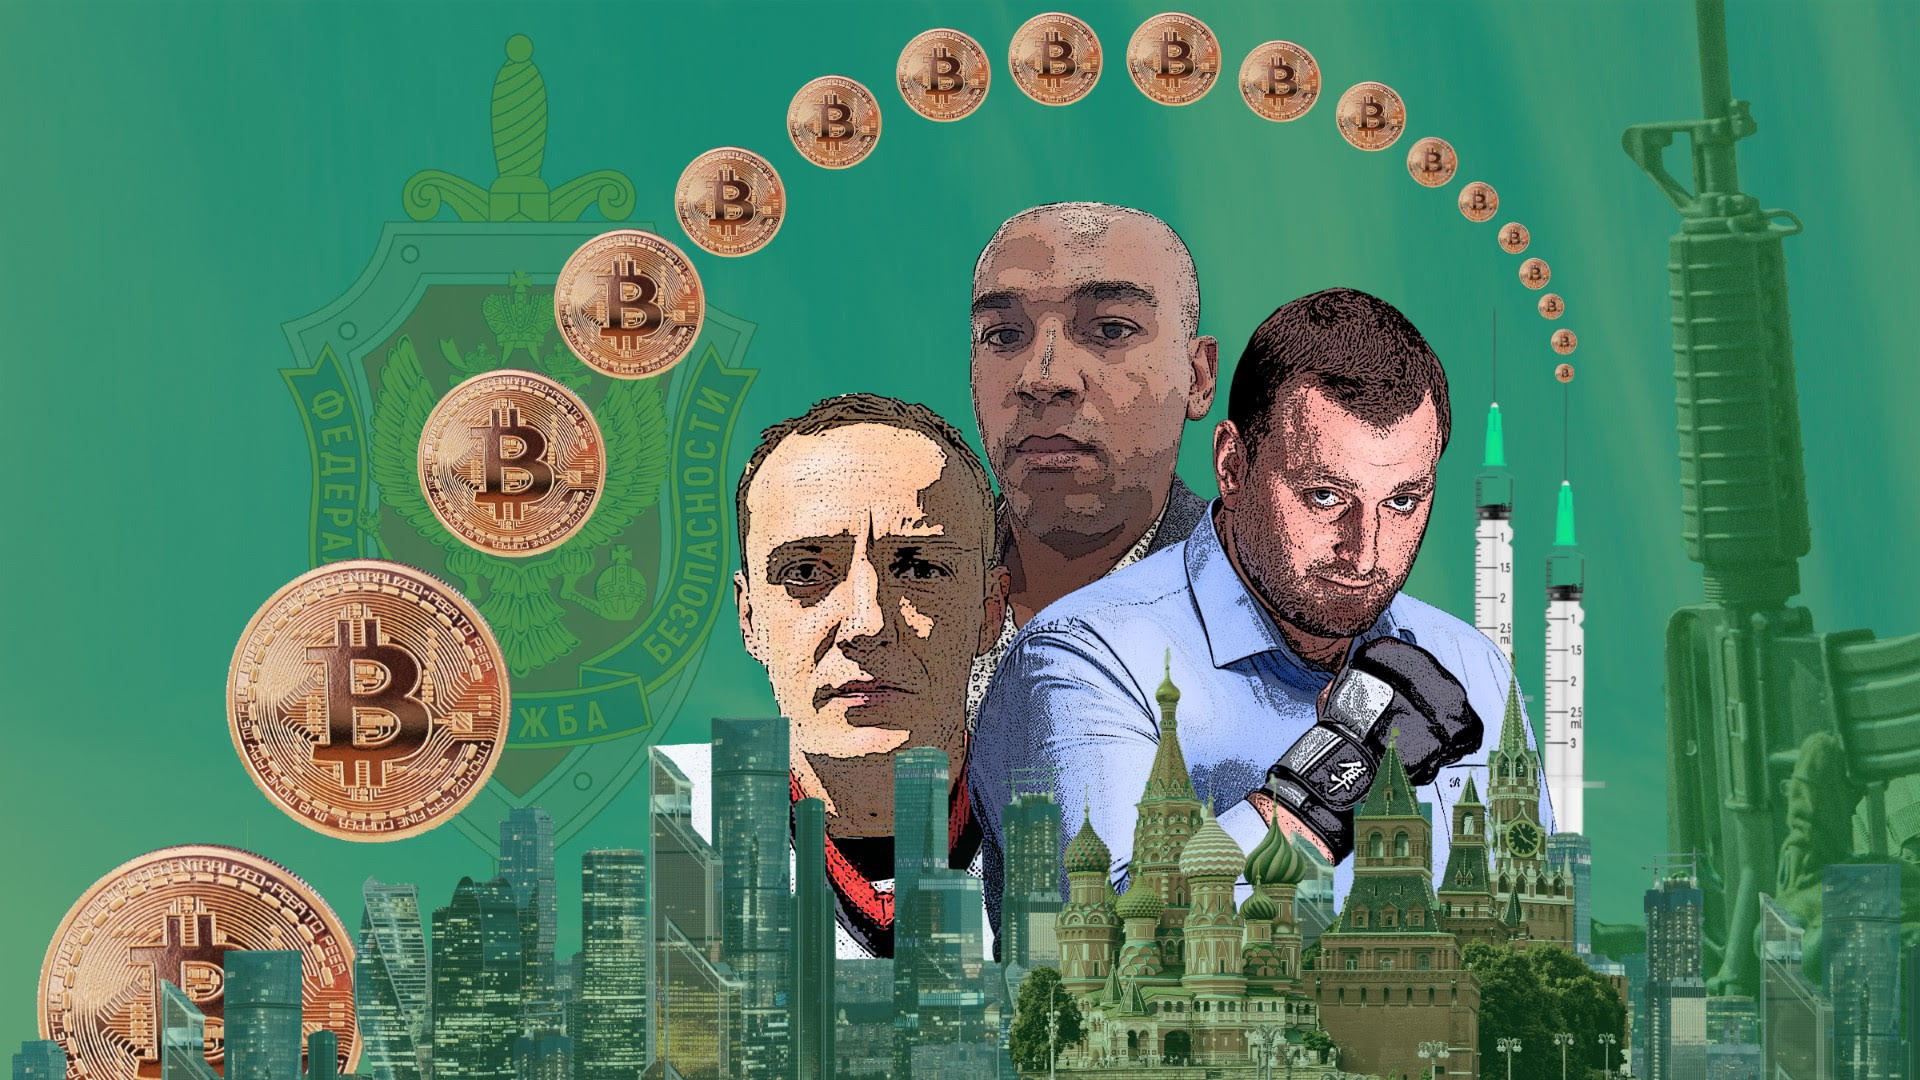 Composite graphical illustration showing bitcoin, a city skyline, syringes, and the heads of three men.